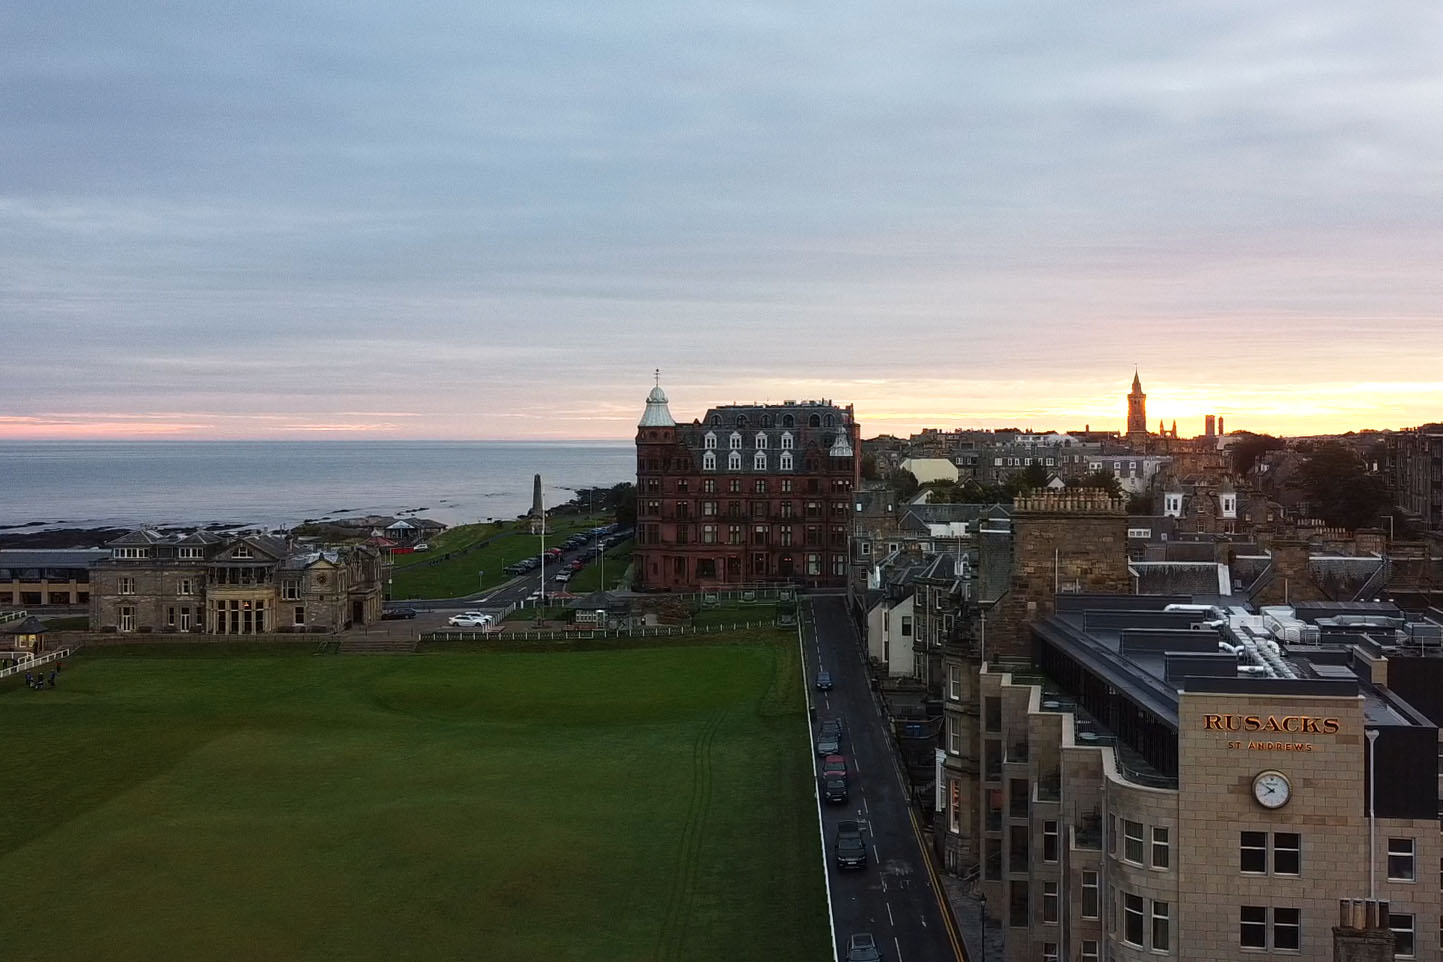 Rusacks Hotel St. Andrews Drone photo